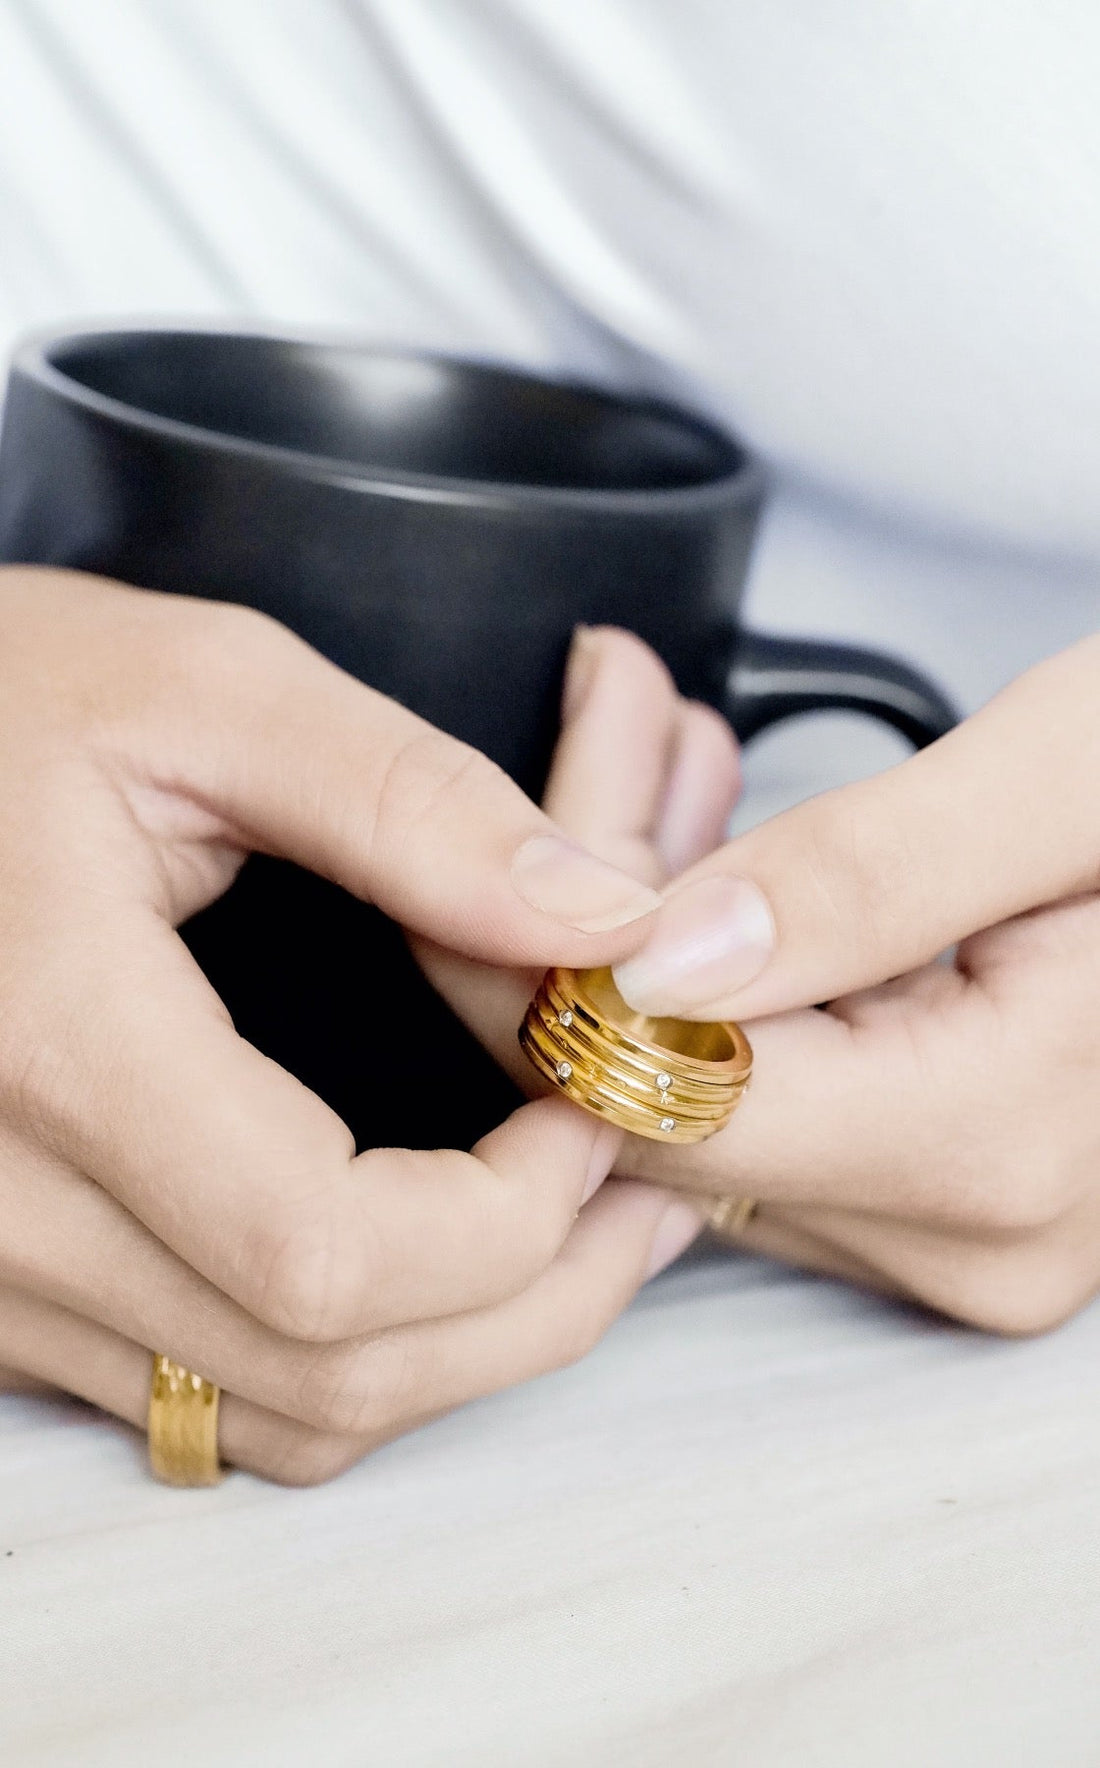 Hands cupping black coffee mug and golding gold spinner anxiety ring with moon and stars